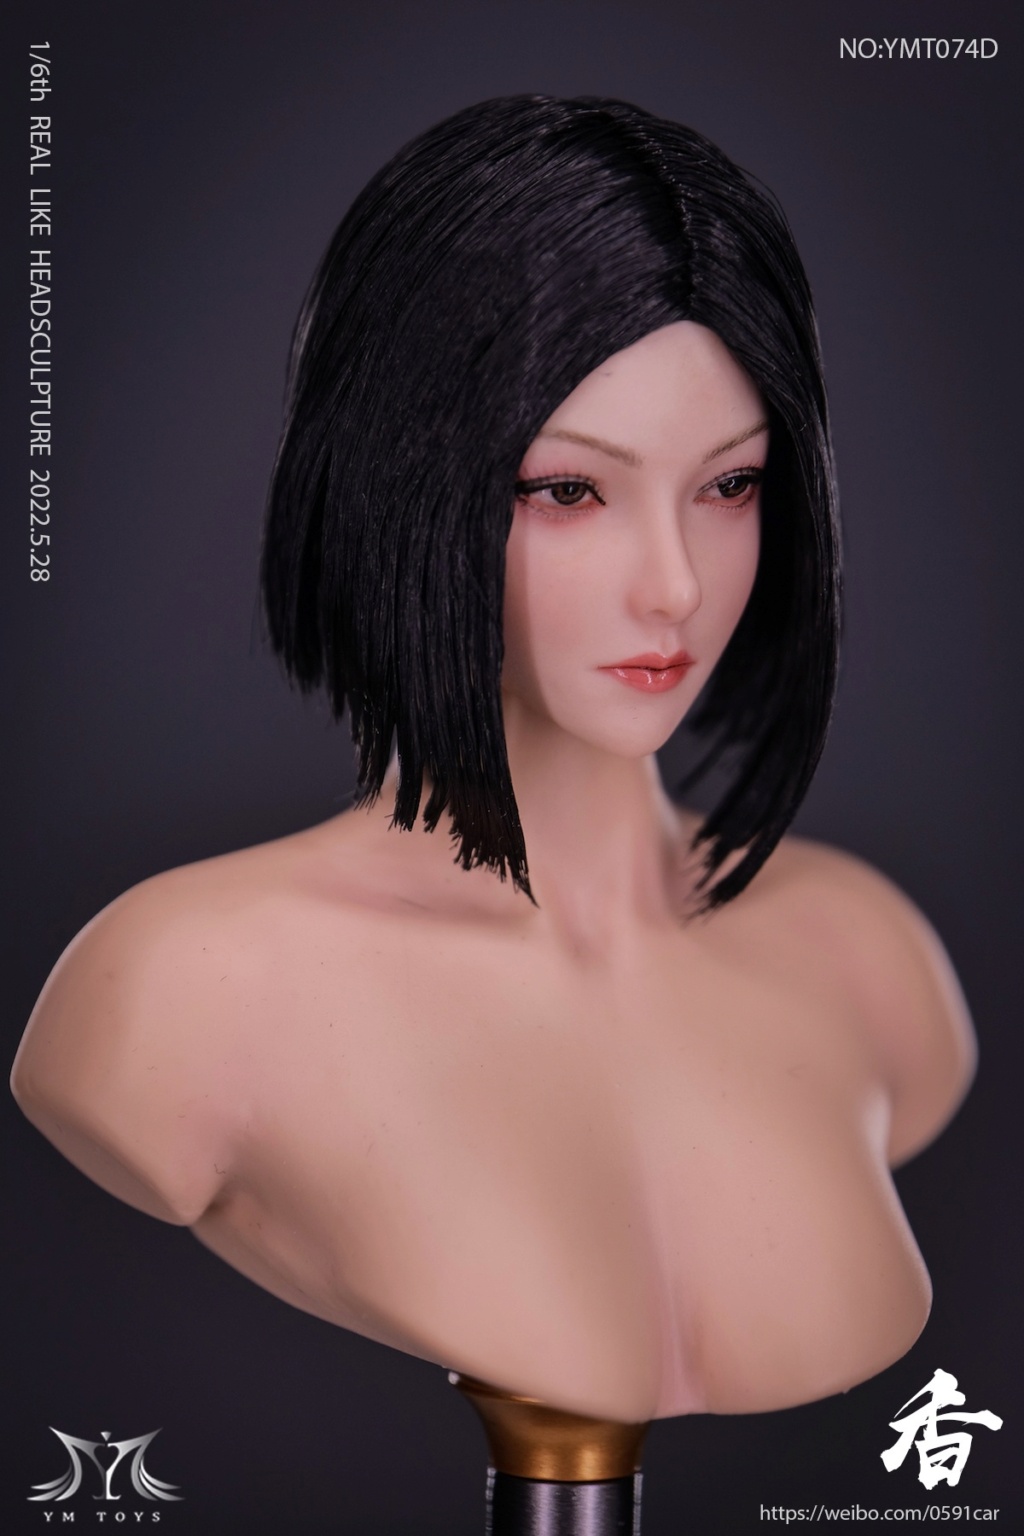 NEW PRODUCT: YMTOYS: 1/6 YMT074 Cool Female Head Sculpt 14502410